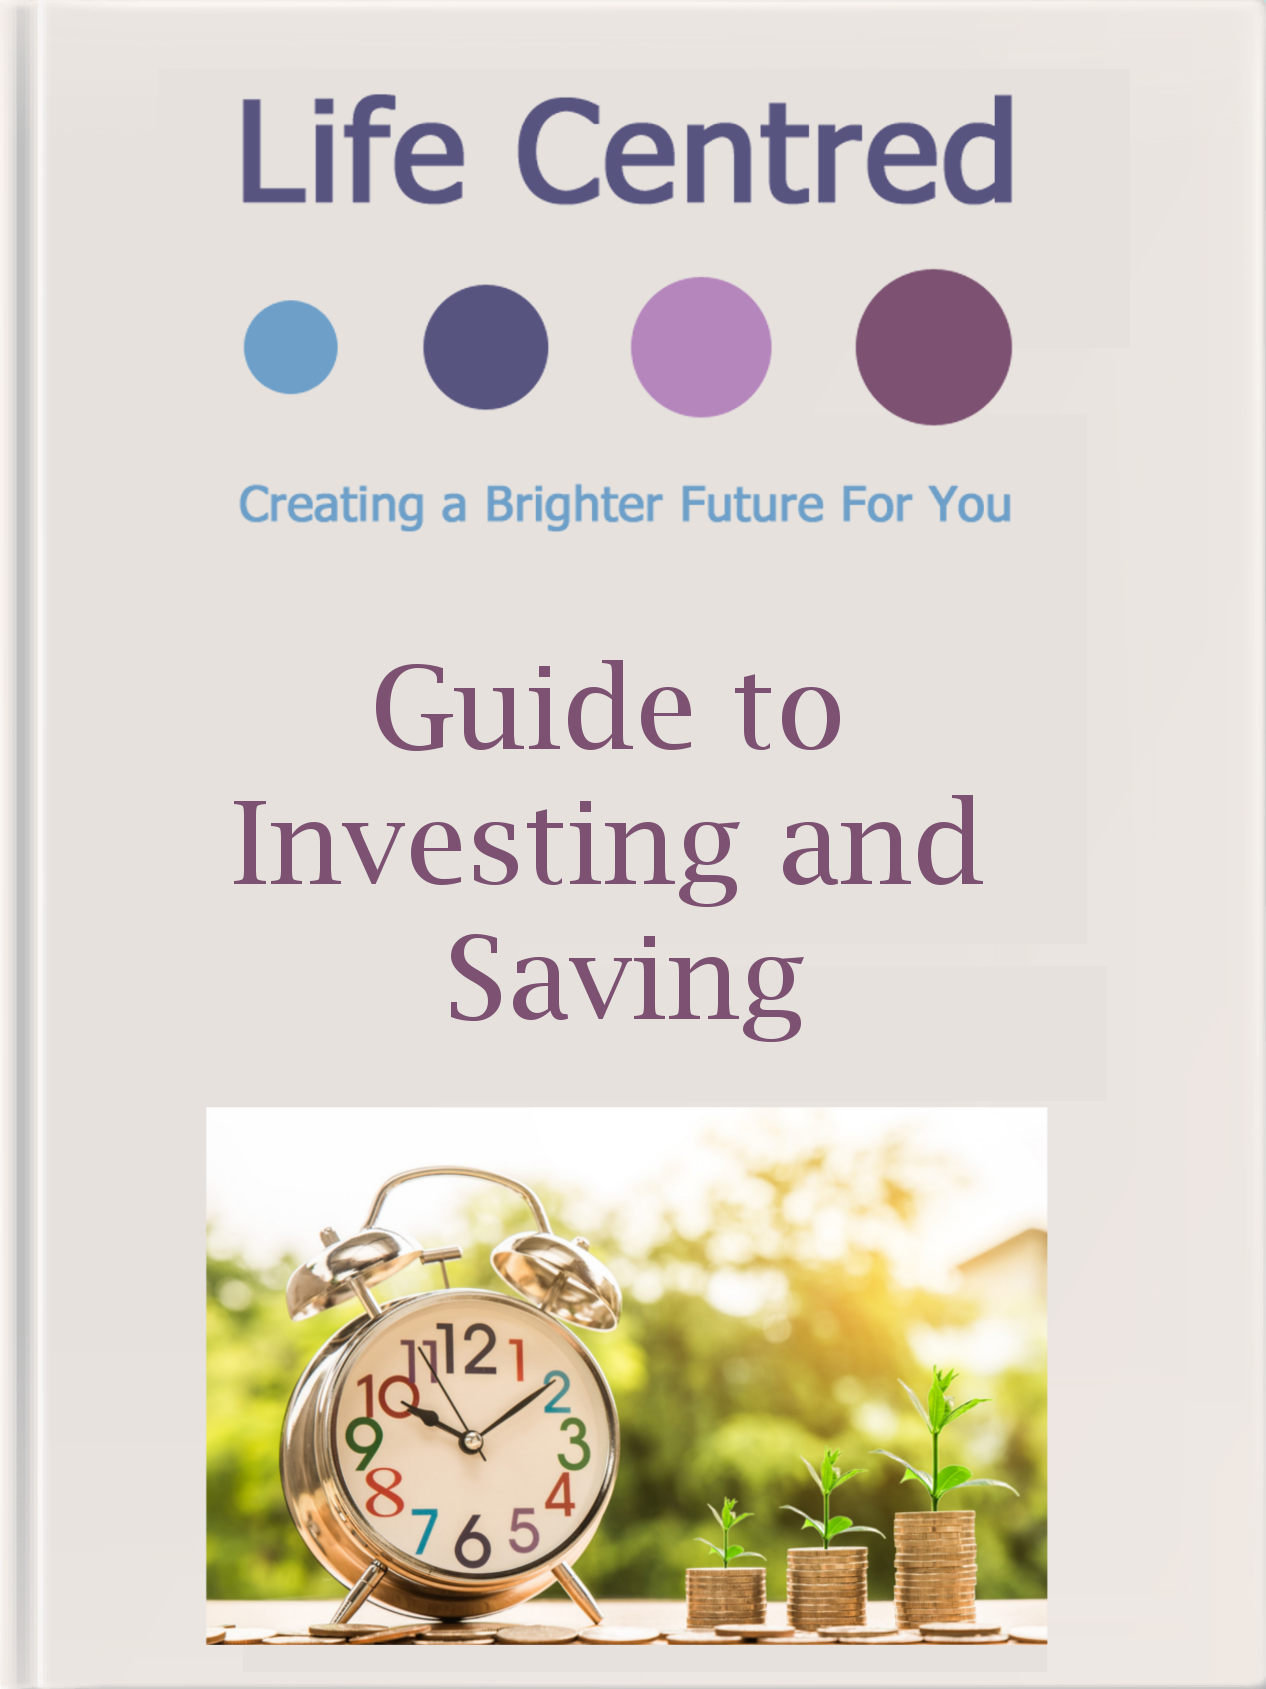 Download our Guide to Investing and Saving